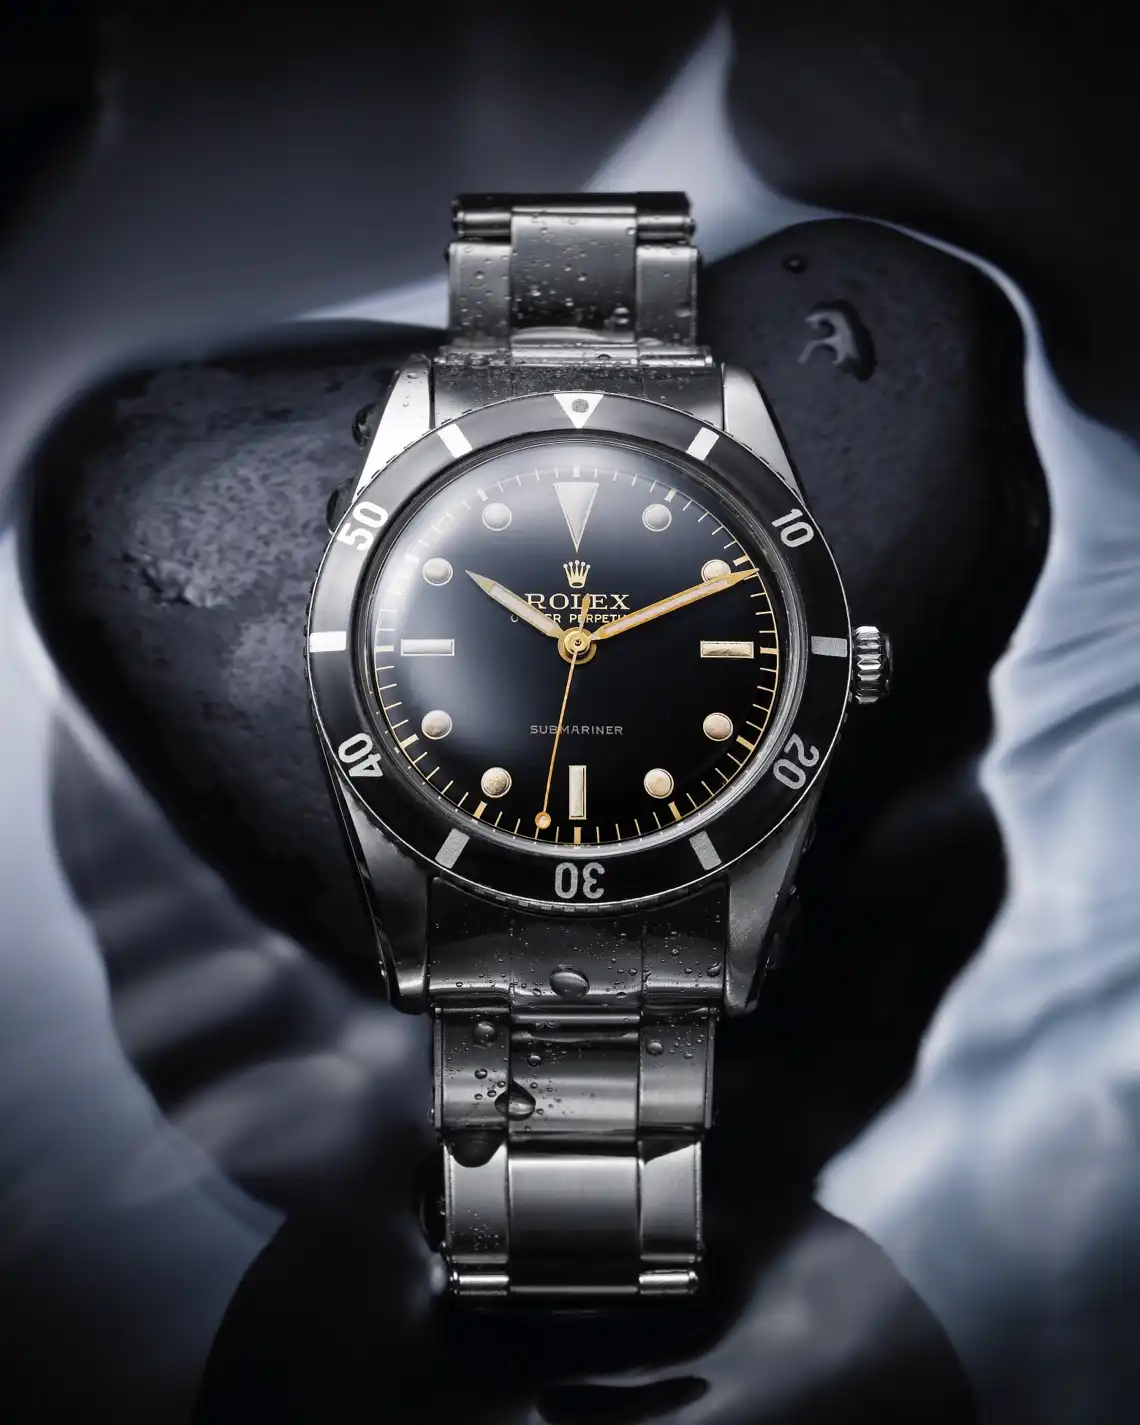 The reference among <br>divers’ watches